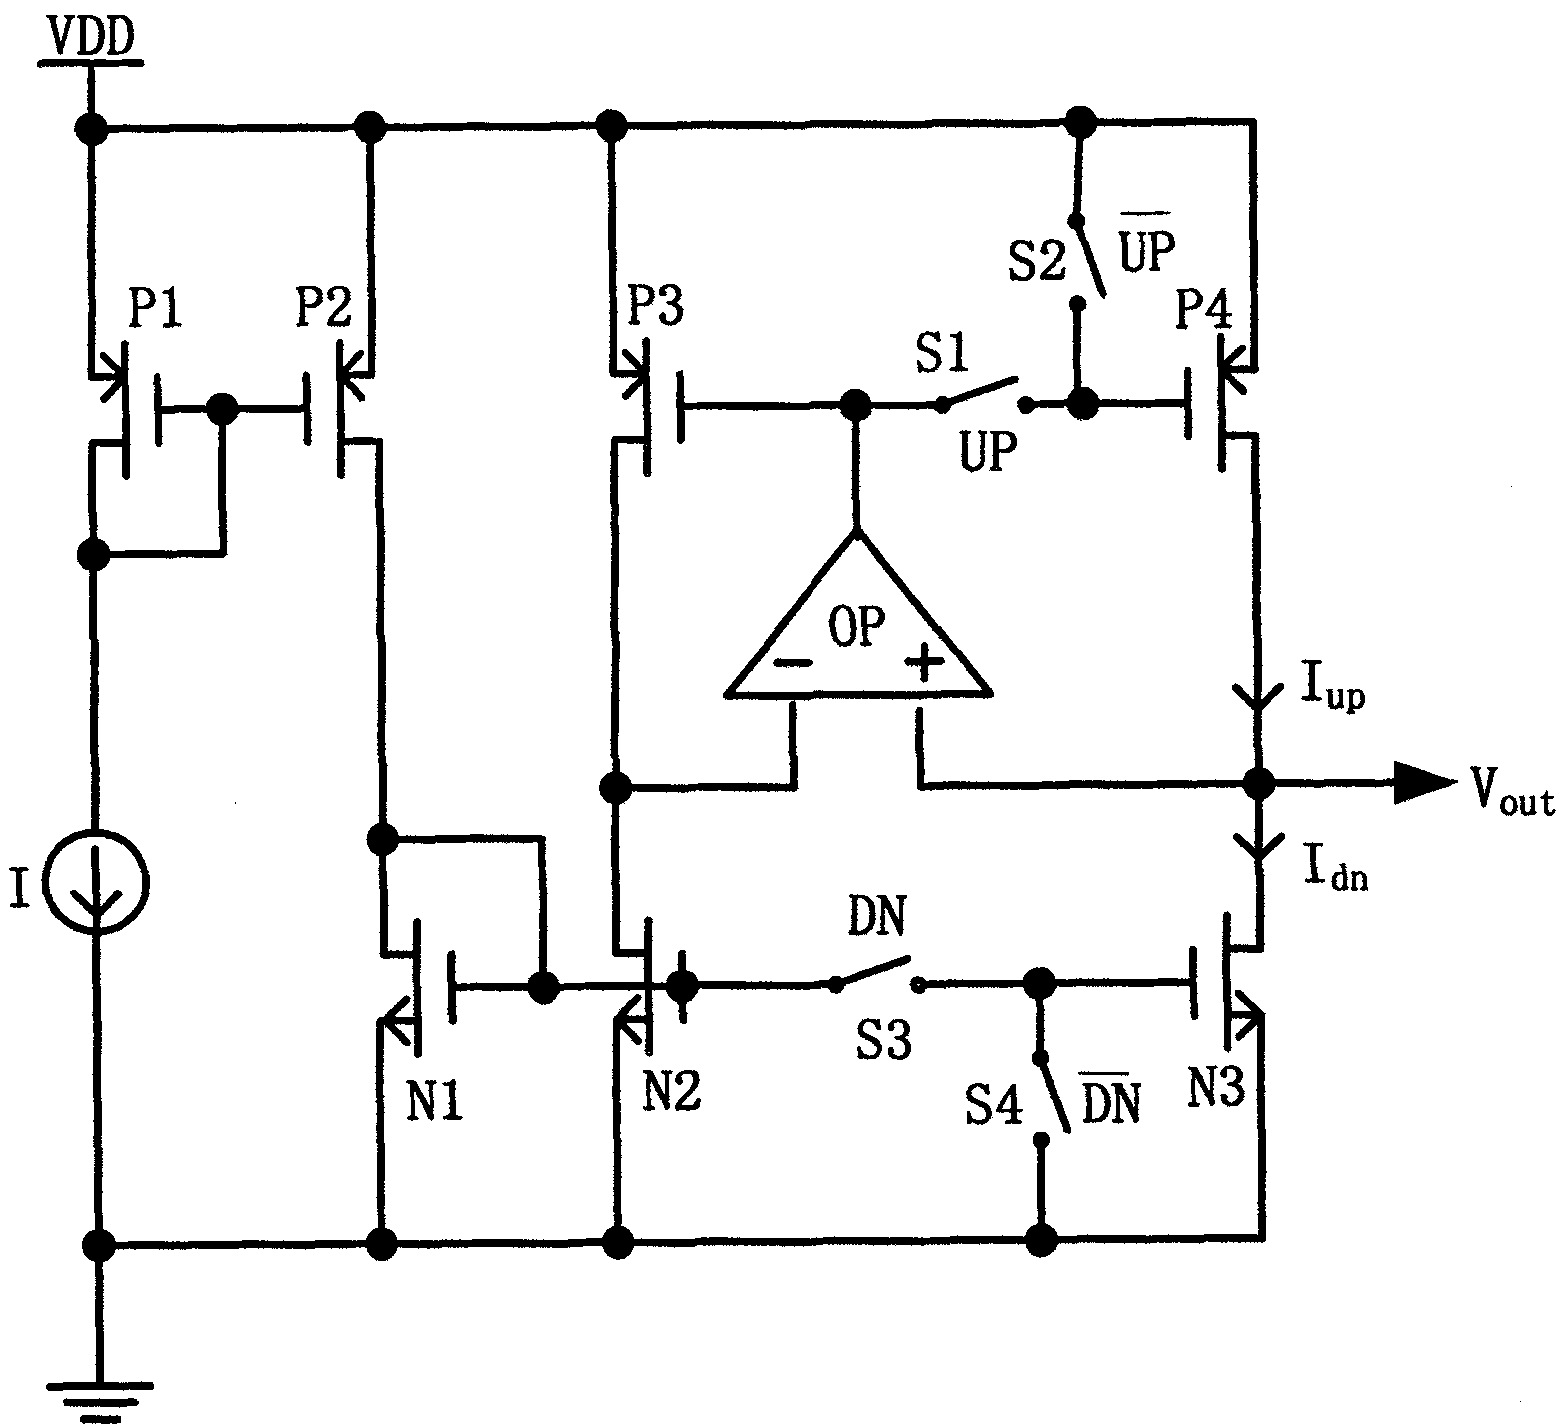 Charge pump circuit used for reducing current mismatch at extra-low voltage in phase-locked loop